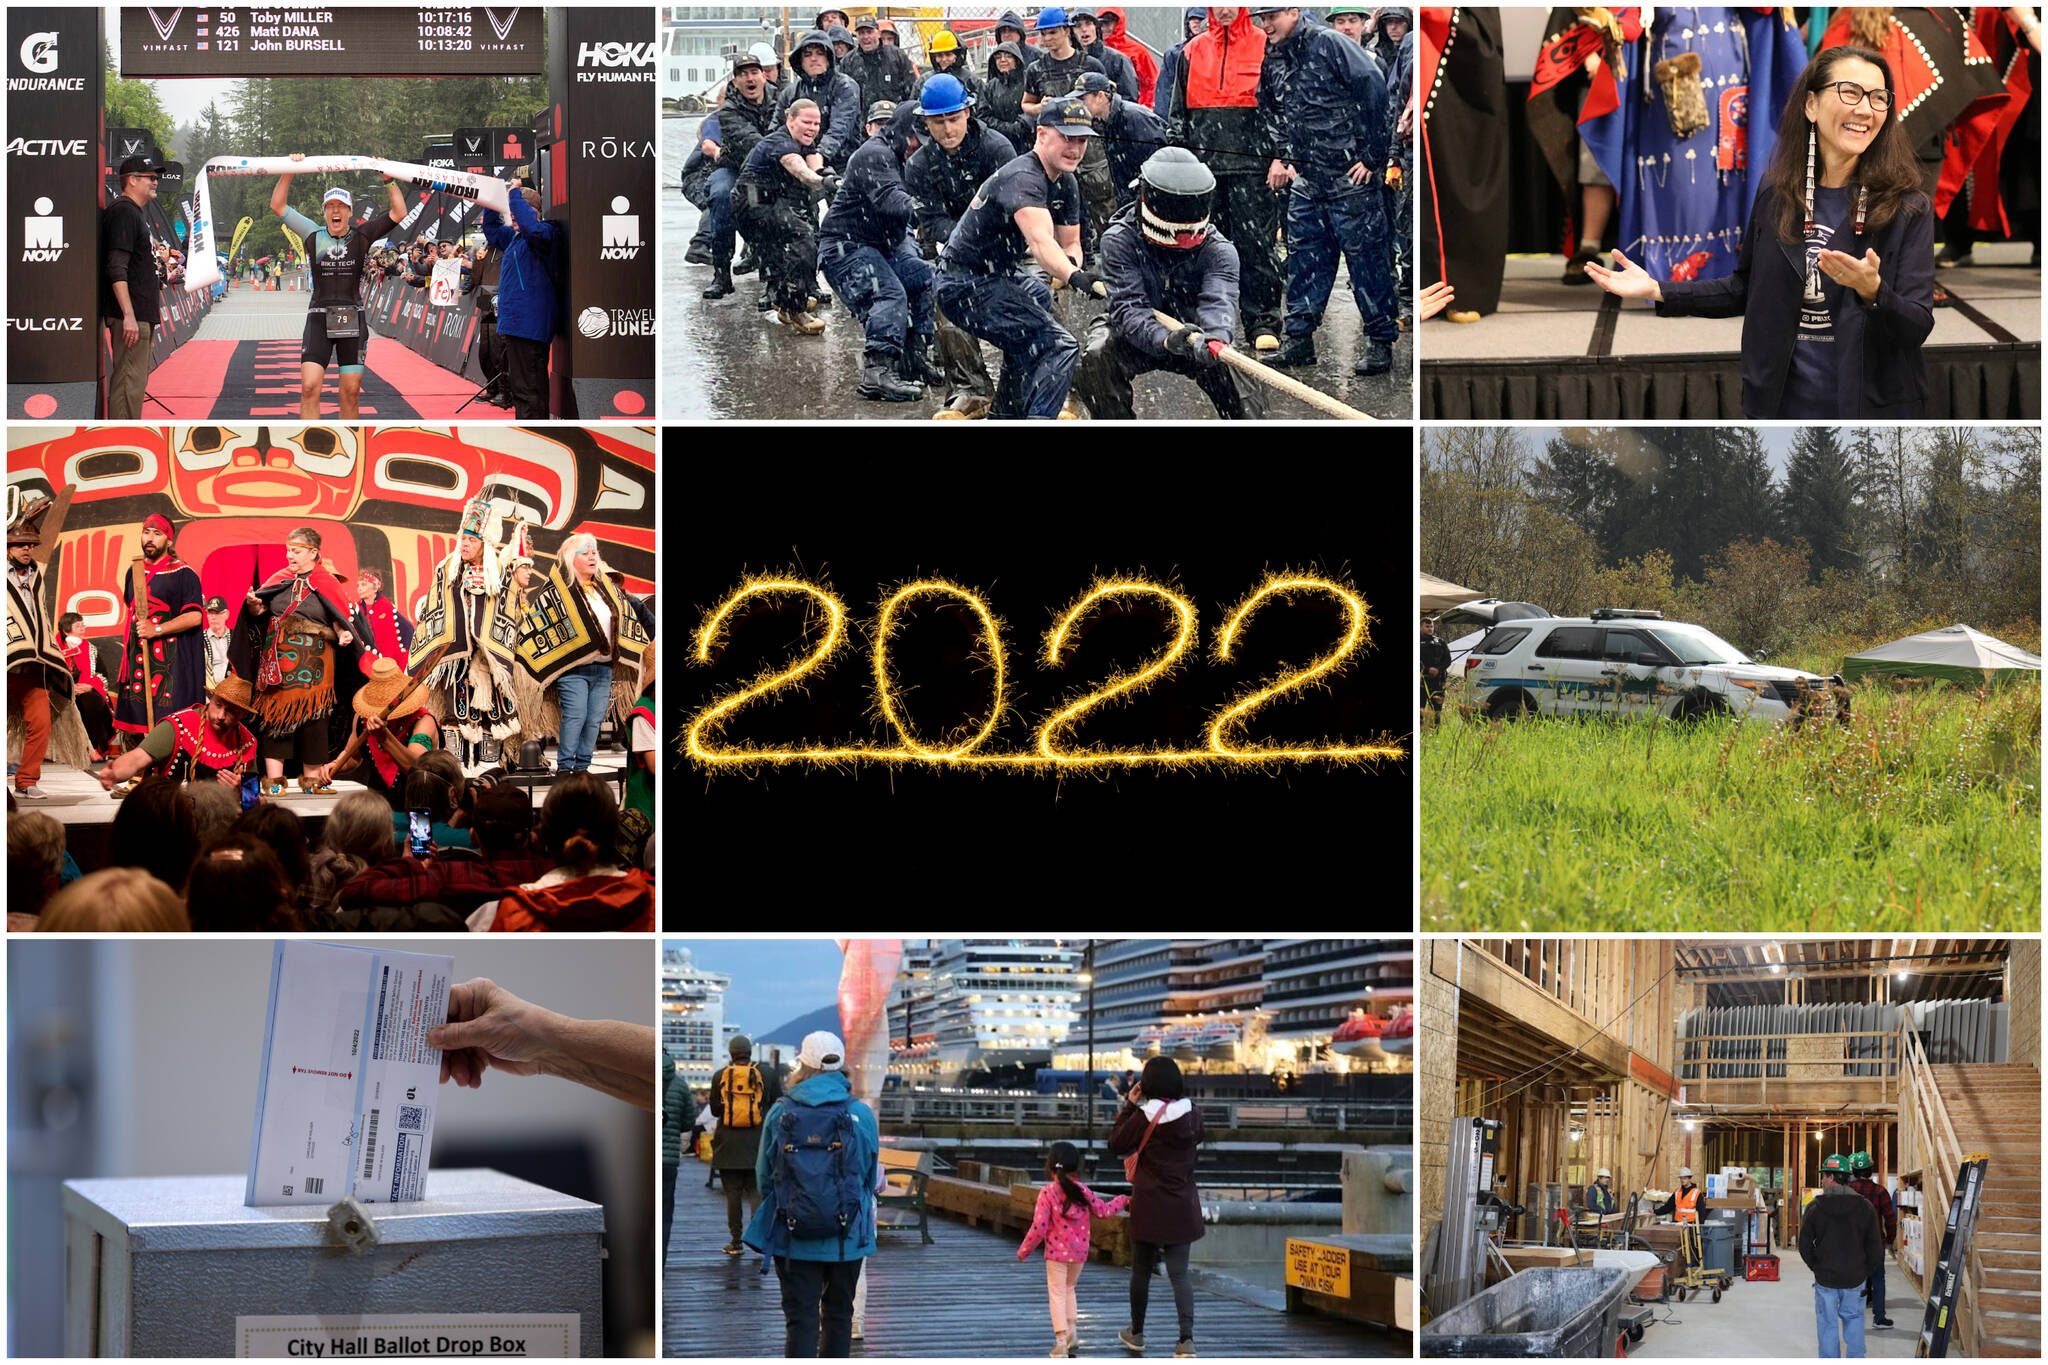 Juneau’s biggest news stories of 2022 ranged from historic victories (and Celebrations) to severe struggles due to shortages of workers and housing. Virtually all were connected by overlapping factors to other top stories. (Juneau Empire staff)